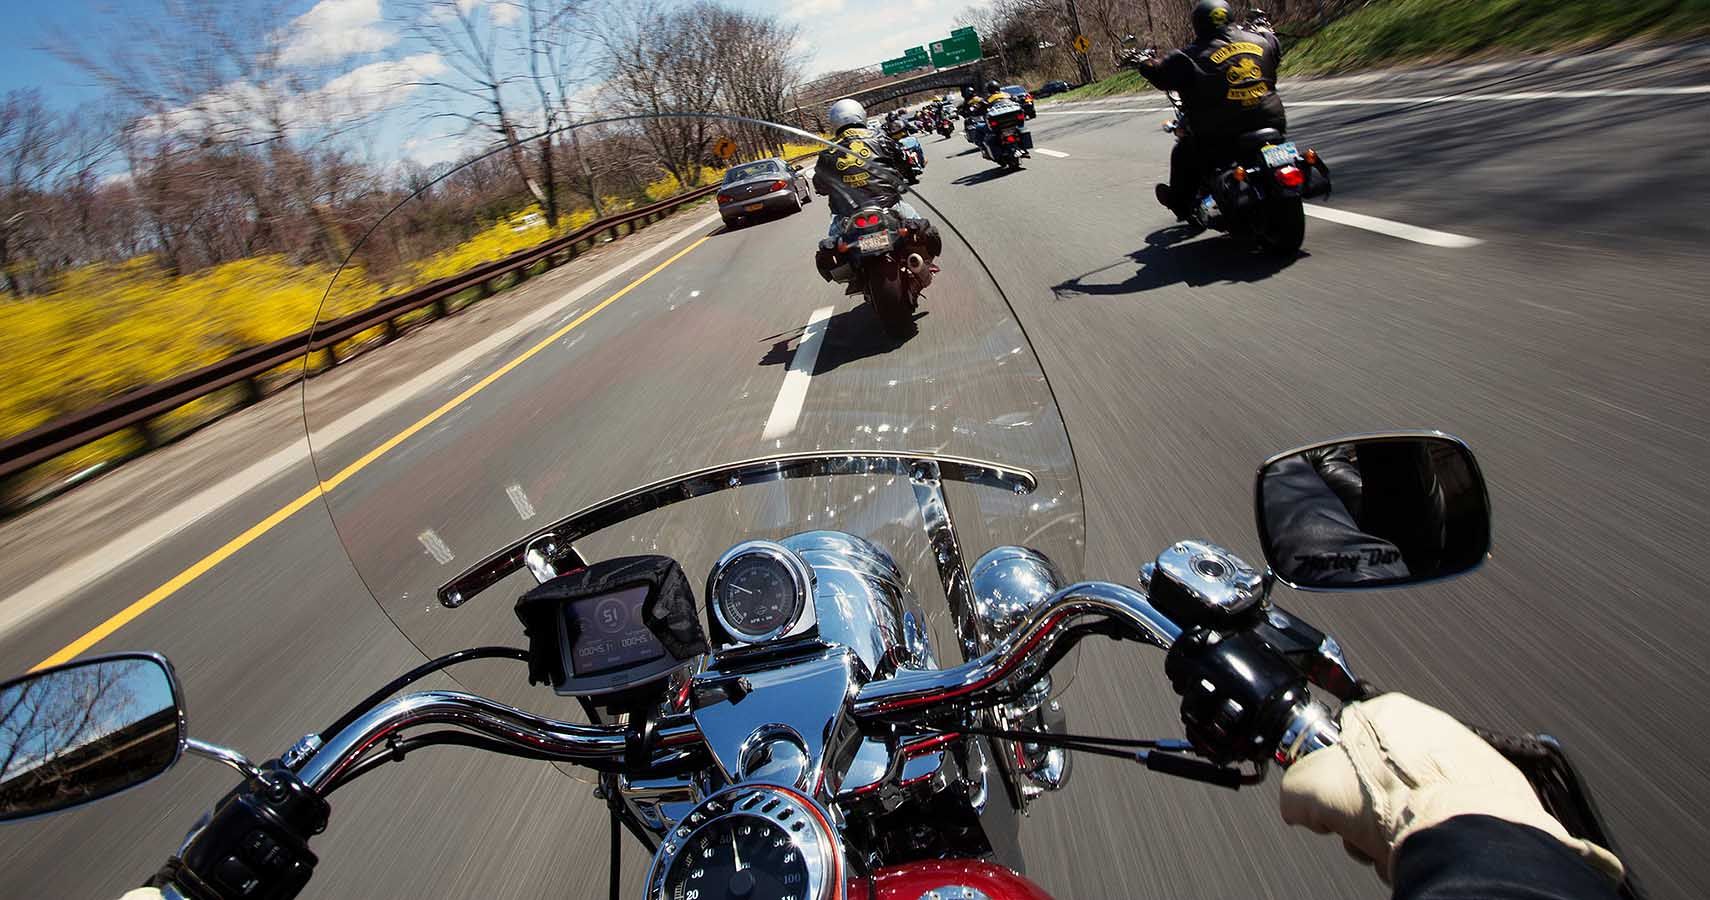 Some Motorcycle Clubs May Need Members To Commit Violence